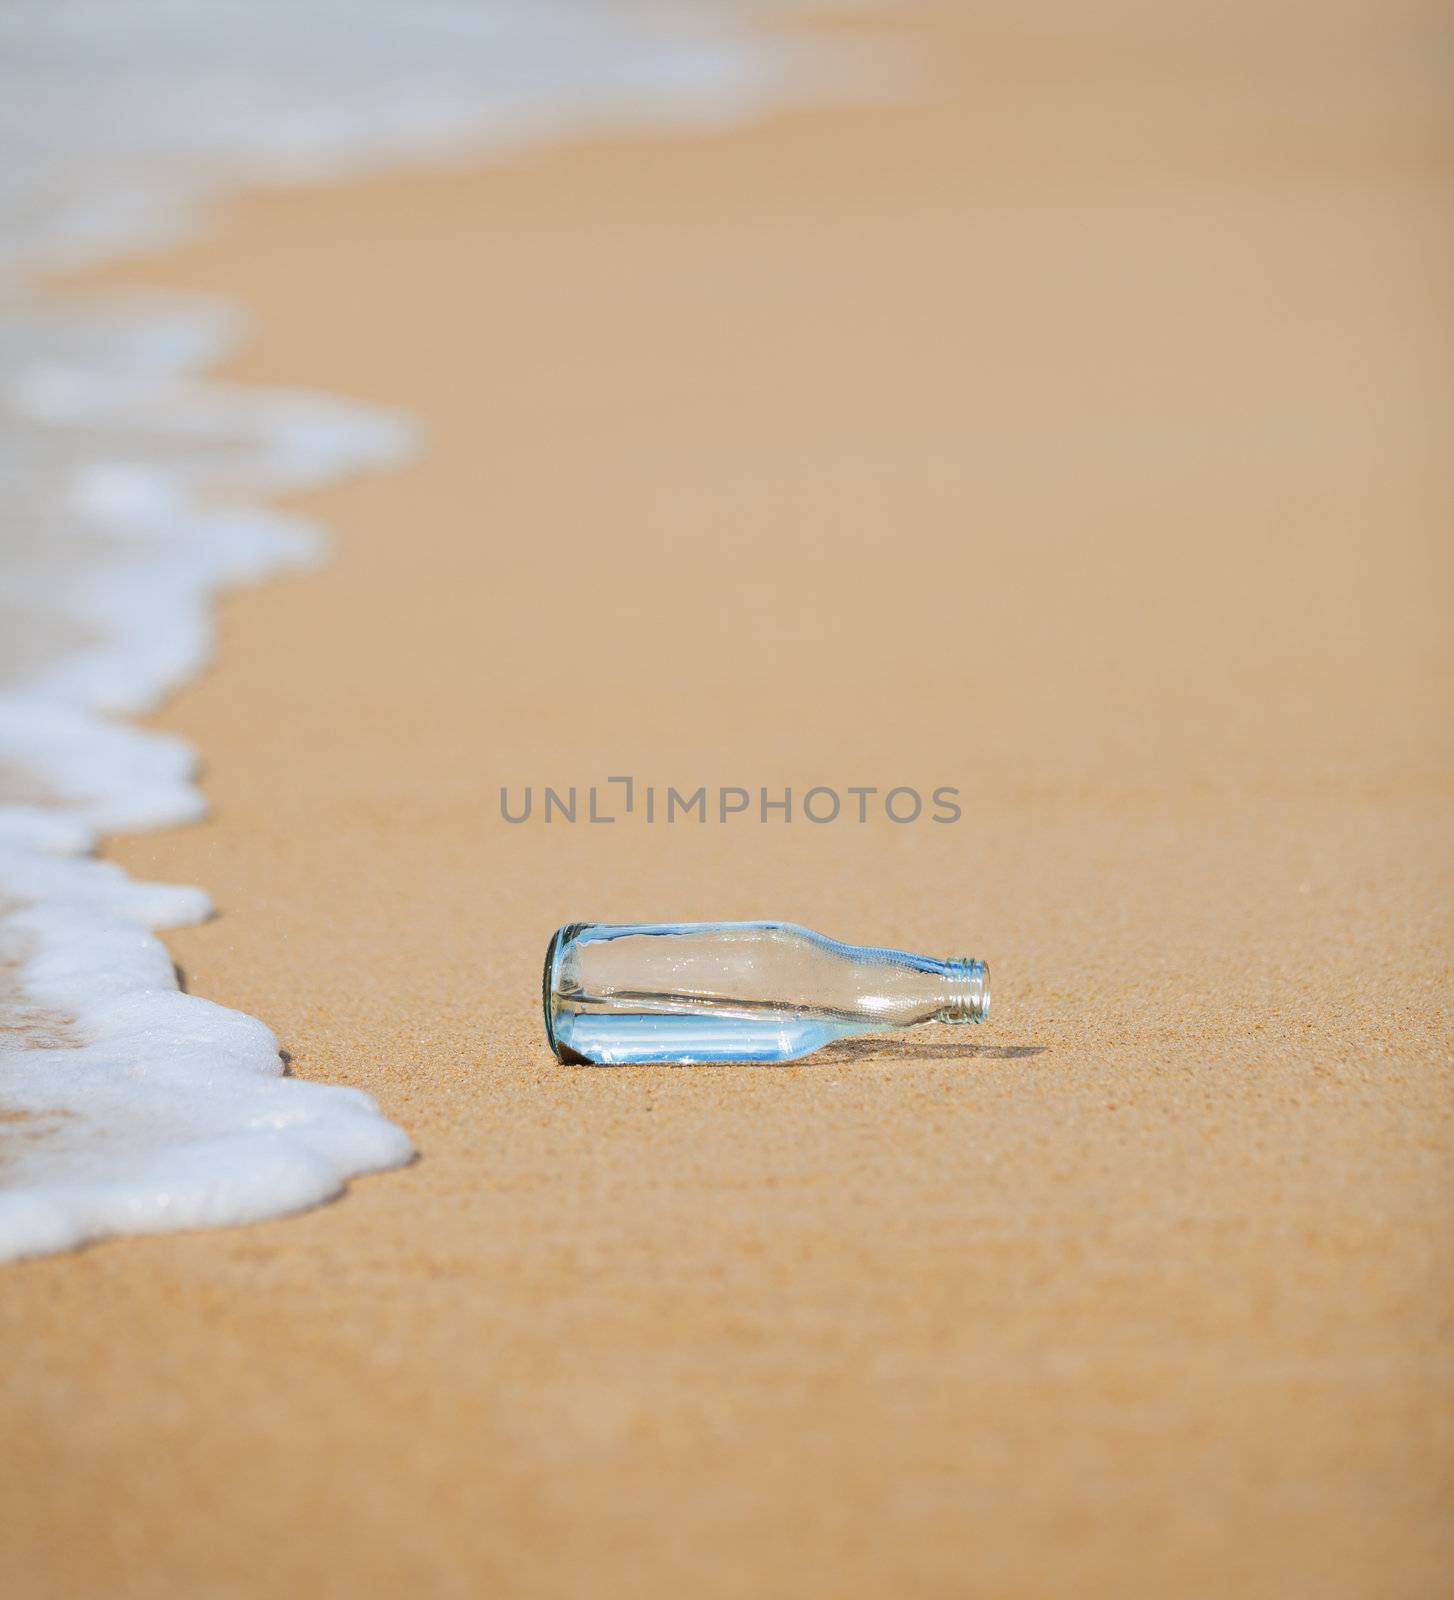 Bottle on the beach by pzaxe